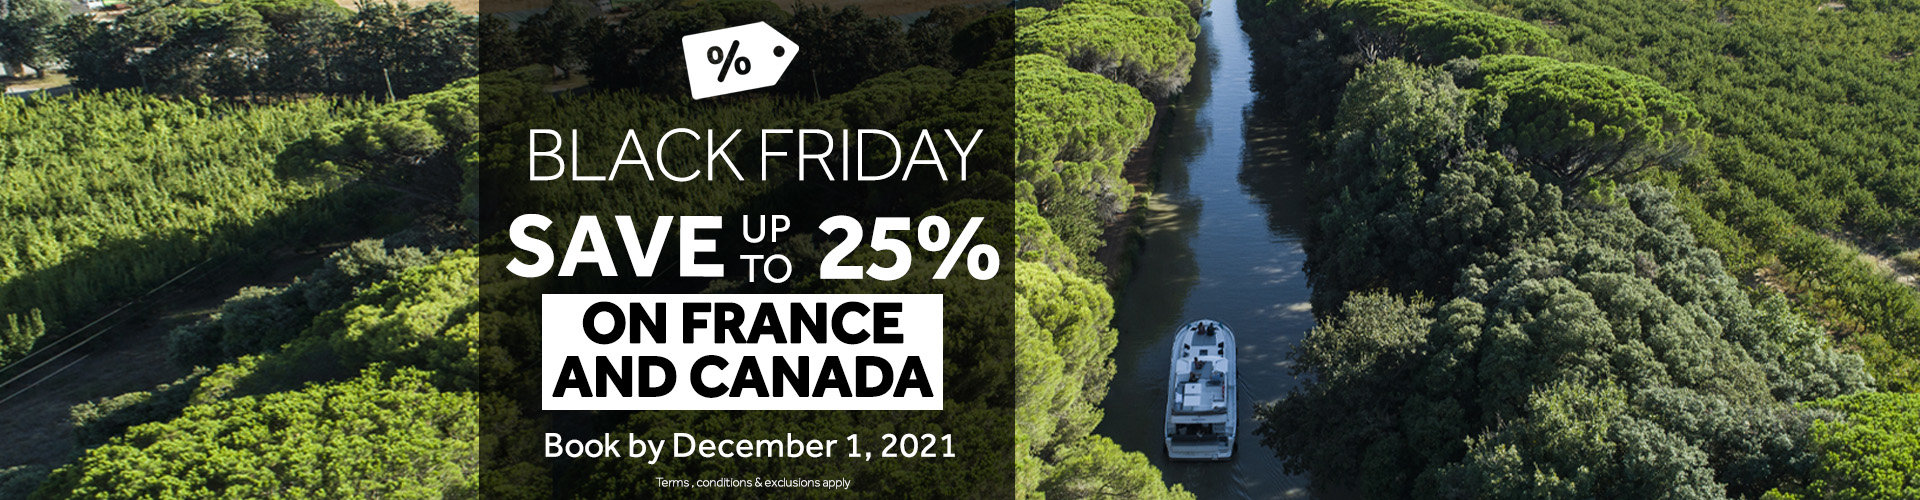 Black Friday Boating Offers